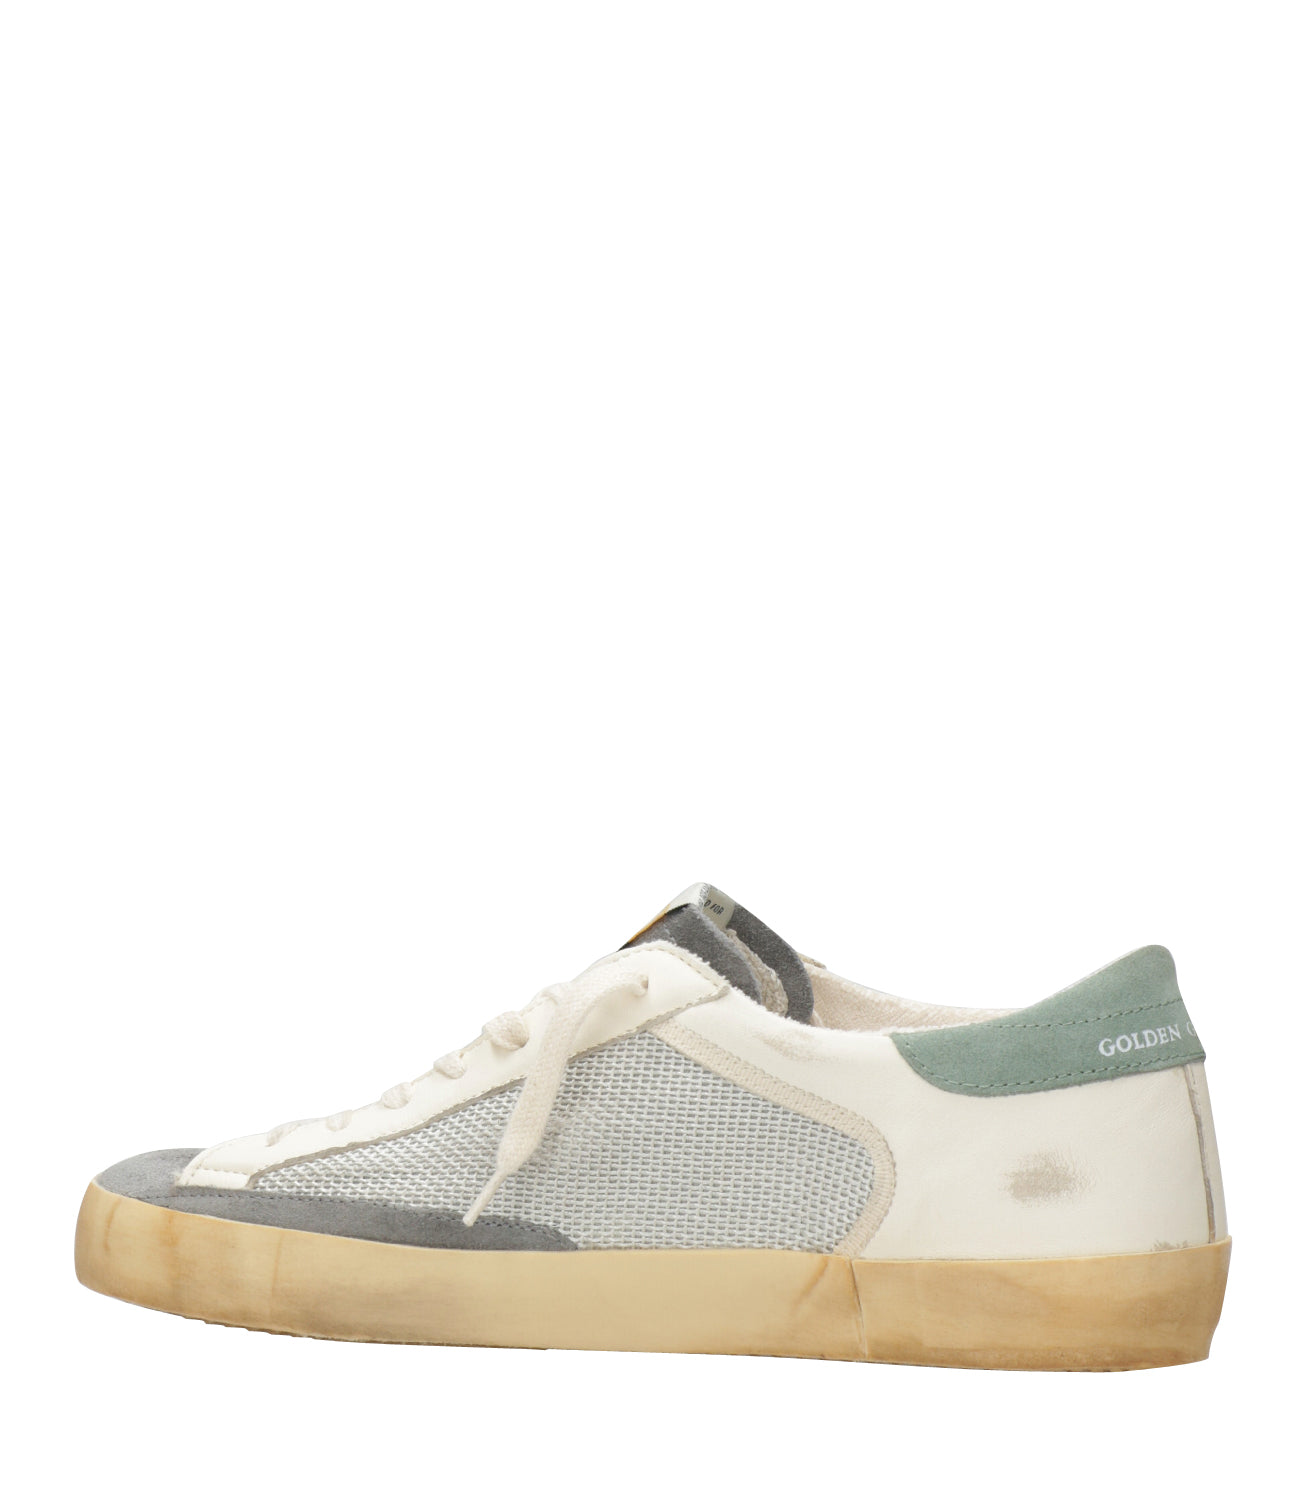 Golden Goose | Sneakers Superstar Gricio, White and Blue